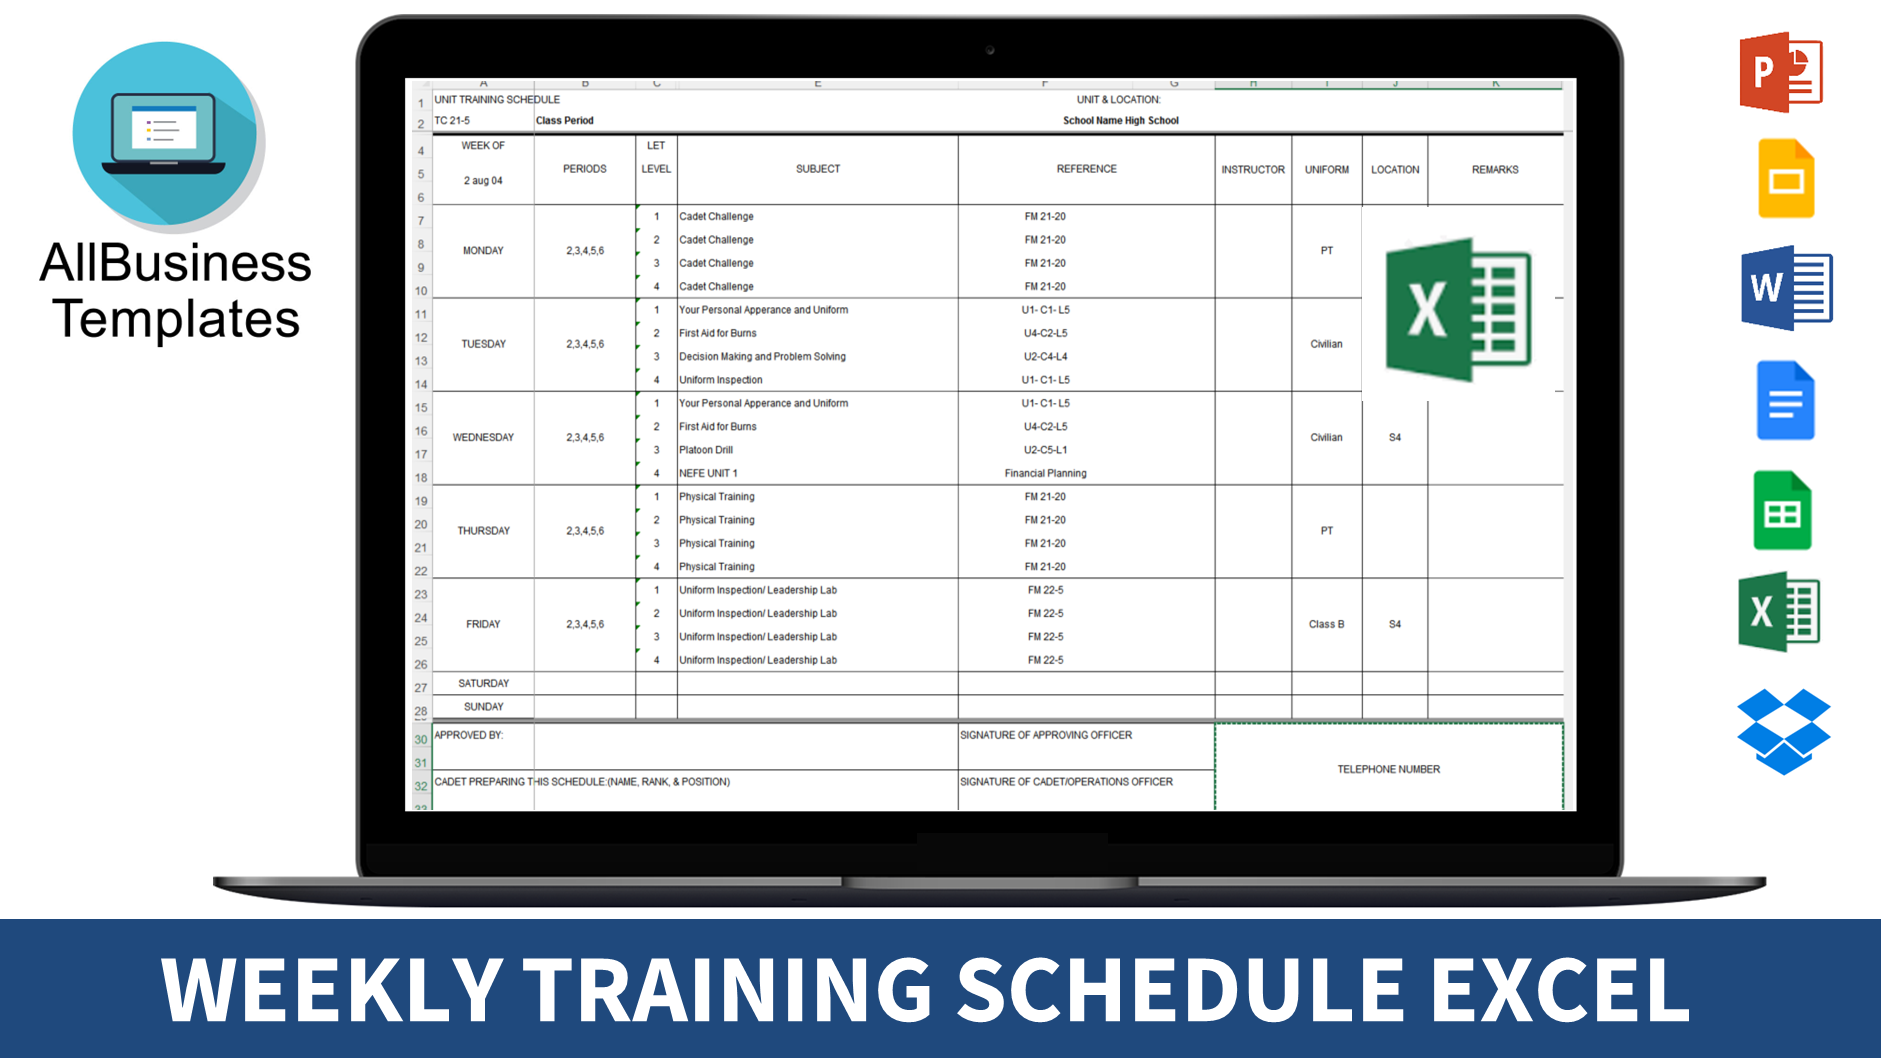 Weekly Training Schedule Excel Templates at